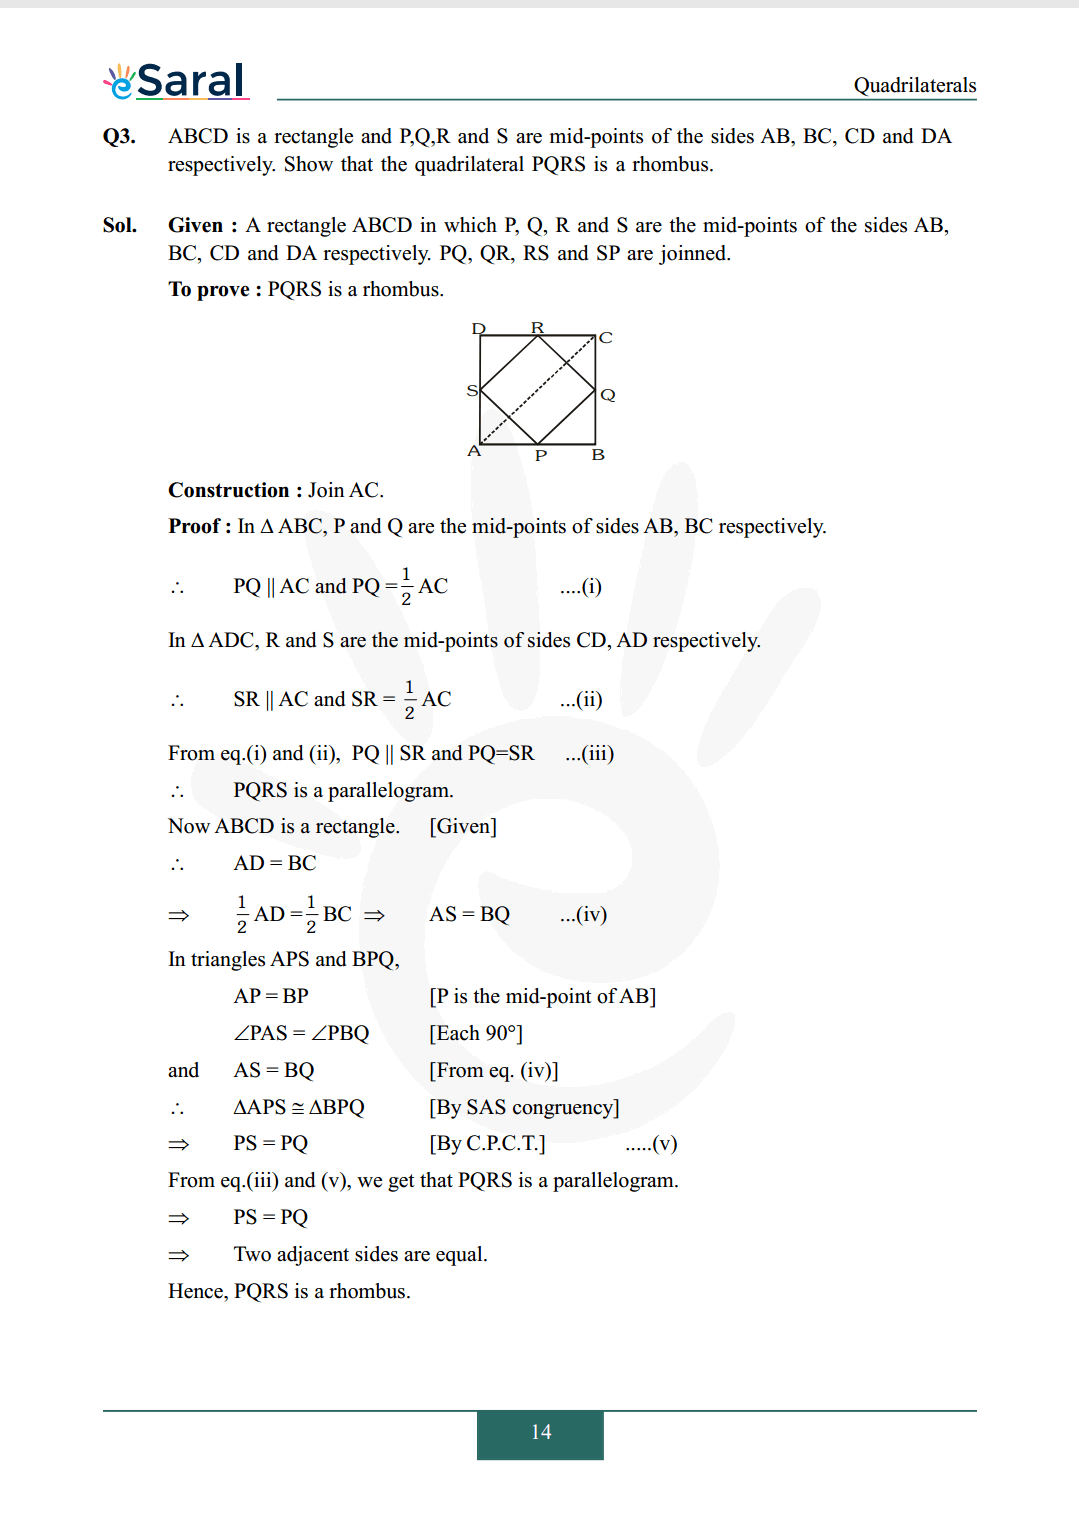 Class 9 maths chapter 8 exercise 8.2 solutions Image 3